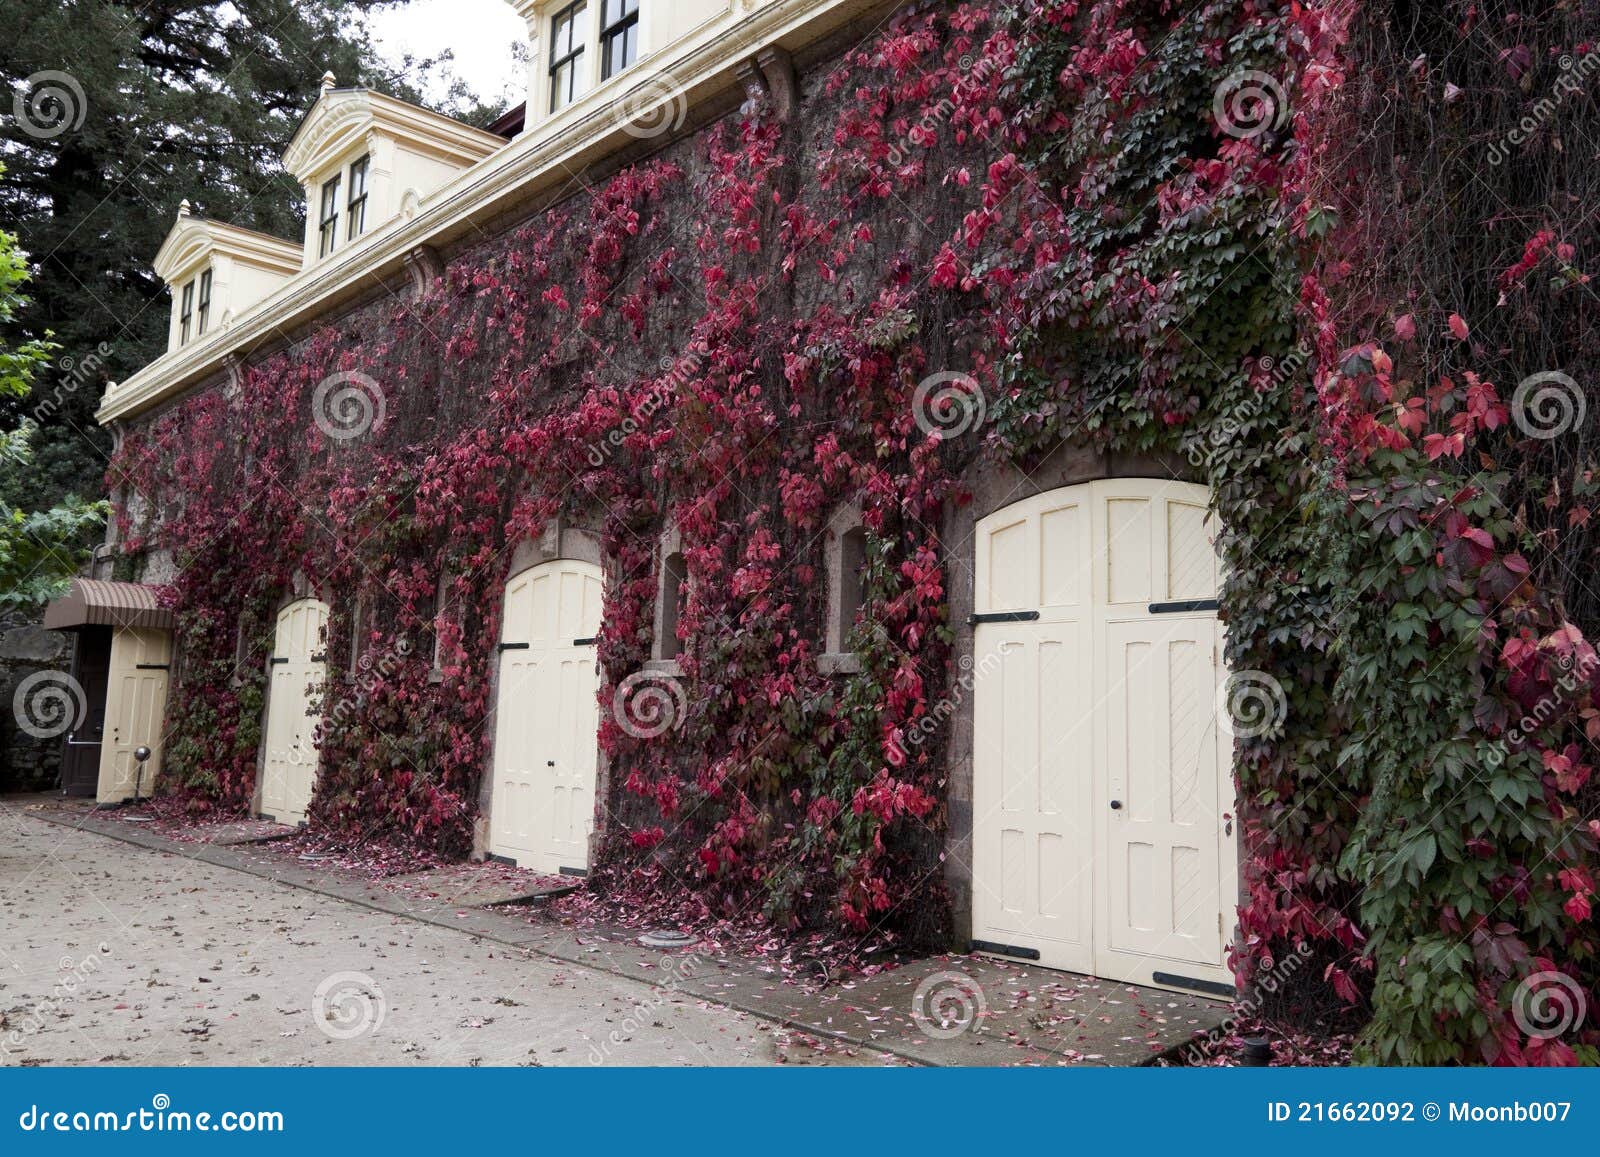 stable with several wood doors and covered with red ivy.